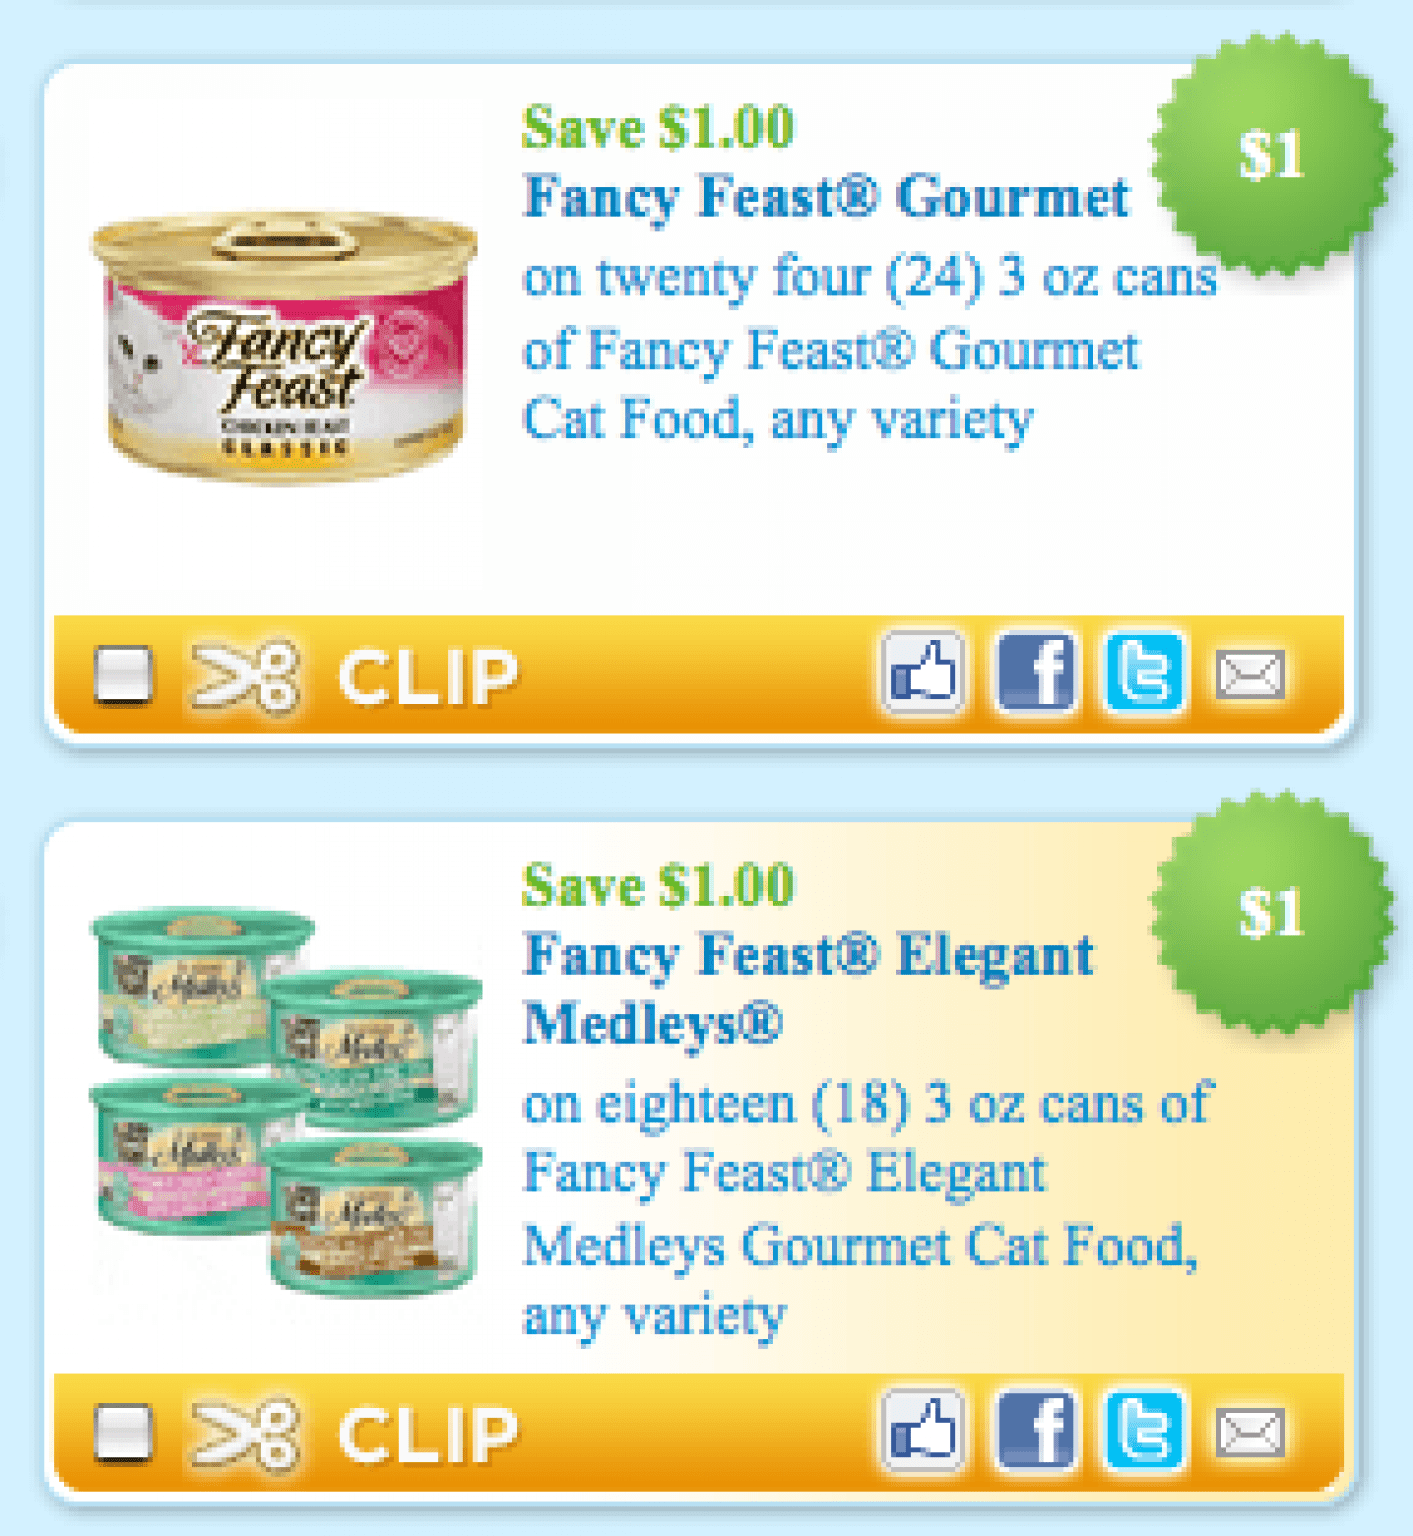 Two New Fancy Feast Printable Coupons!